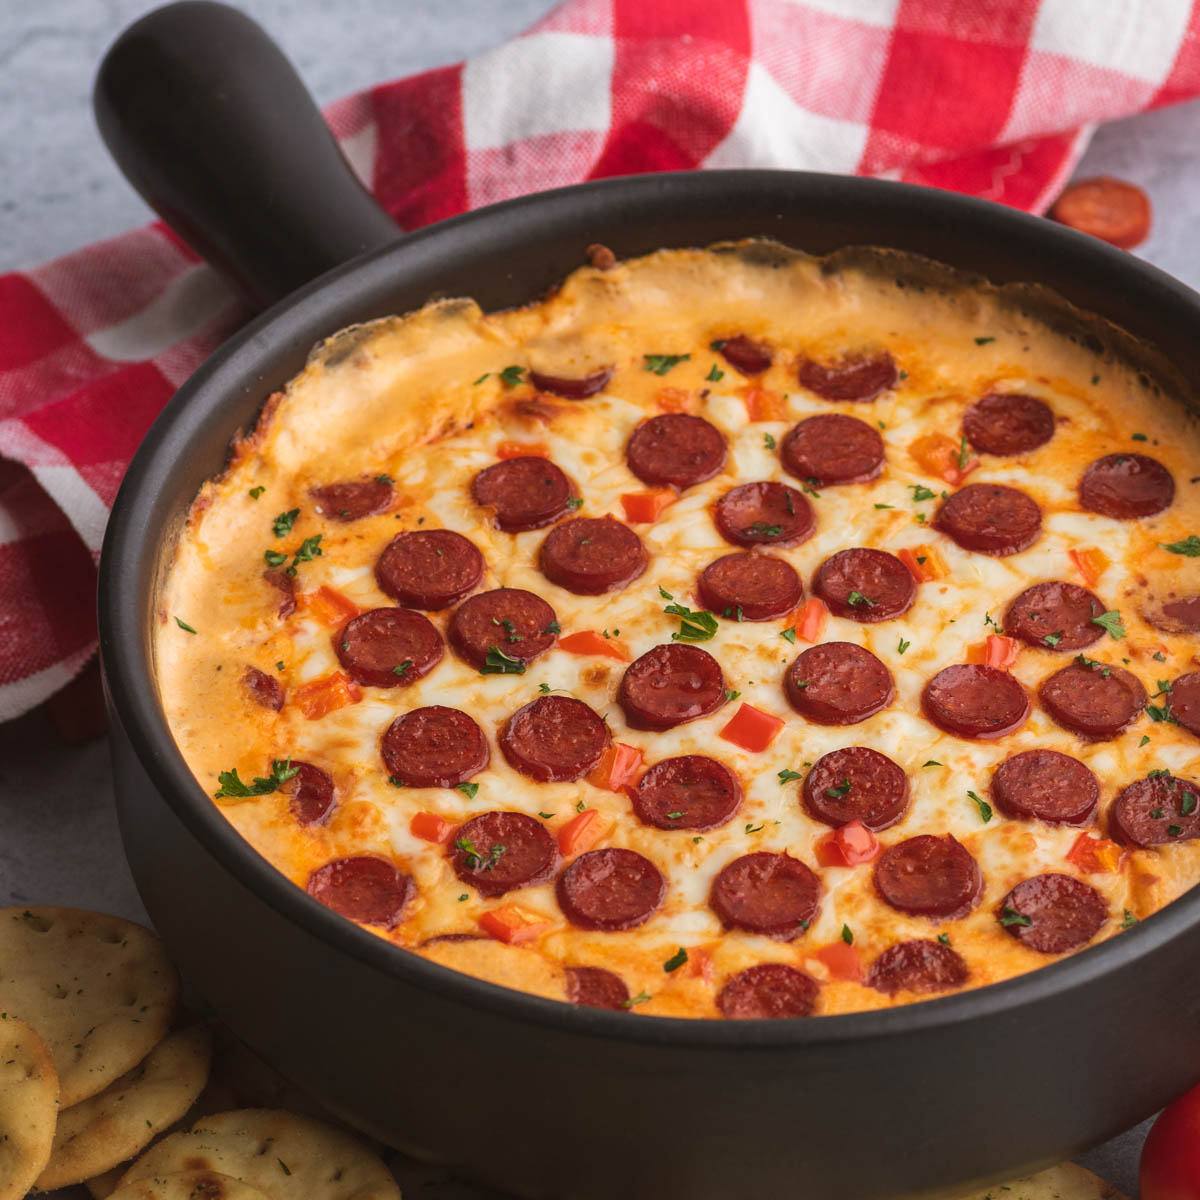 A black baking dish filled with bubbling hot cheesy pepperoni pizza dip.